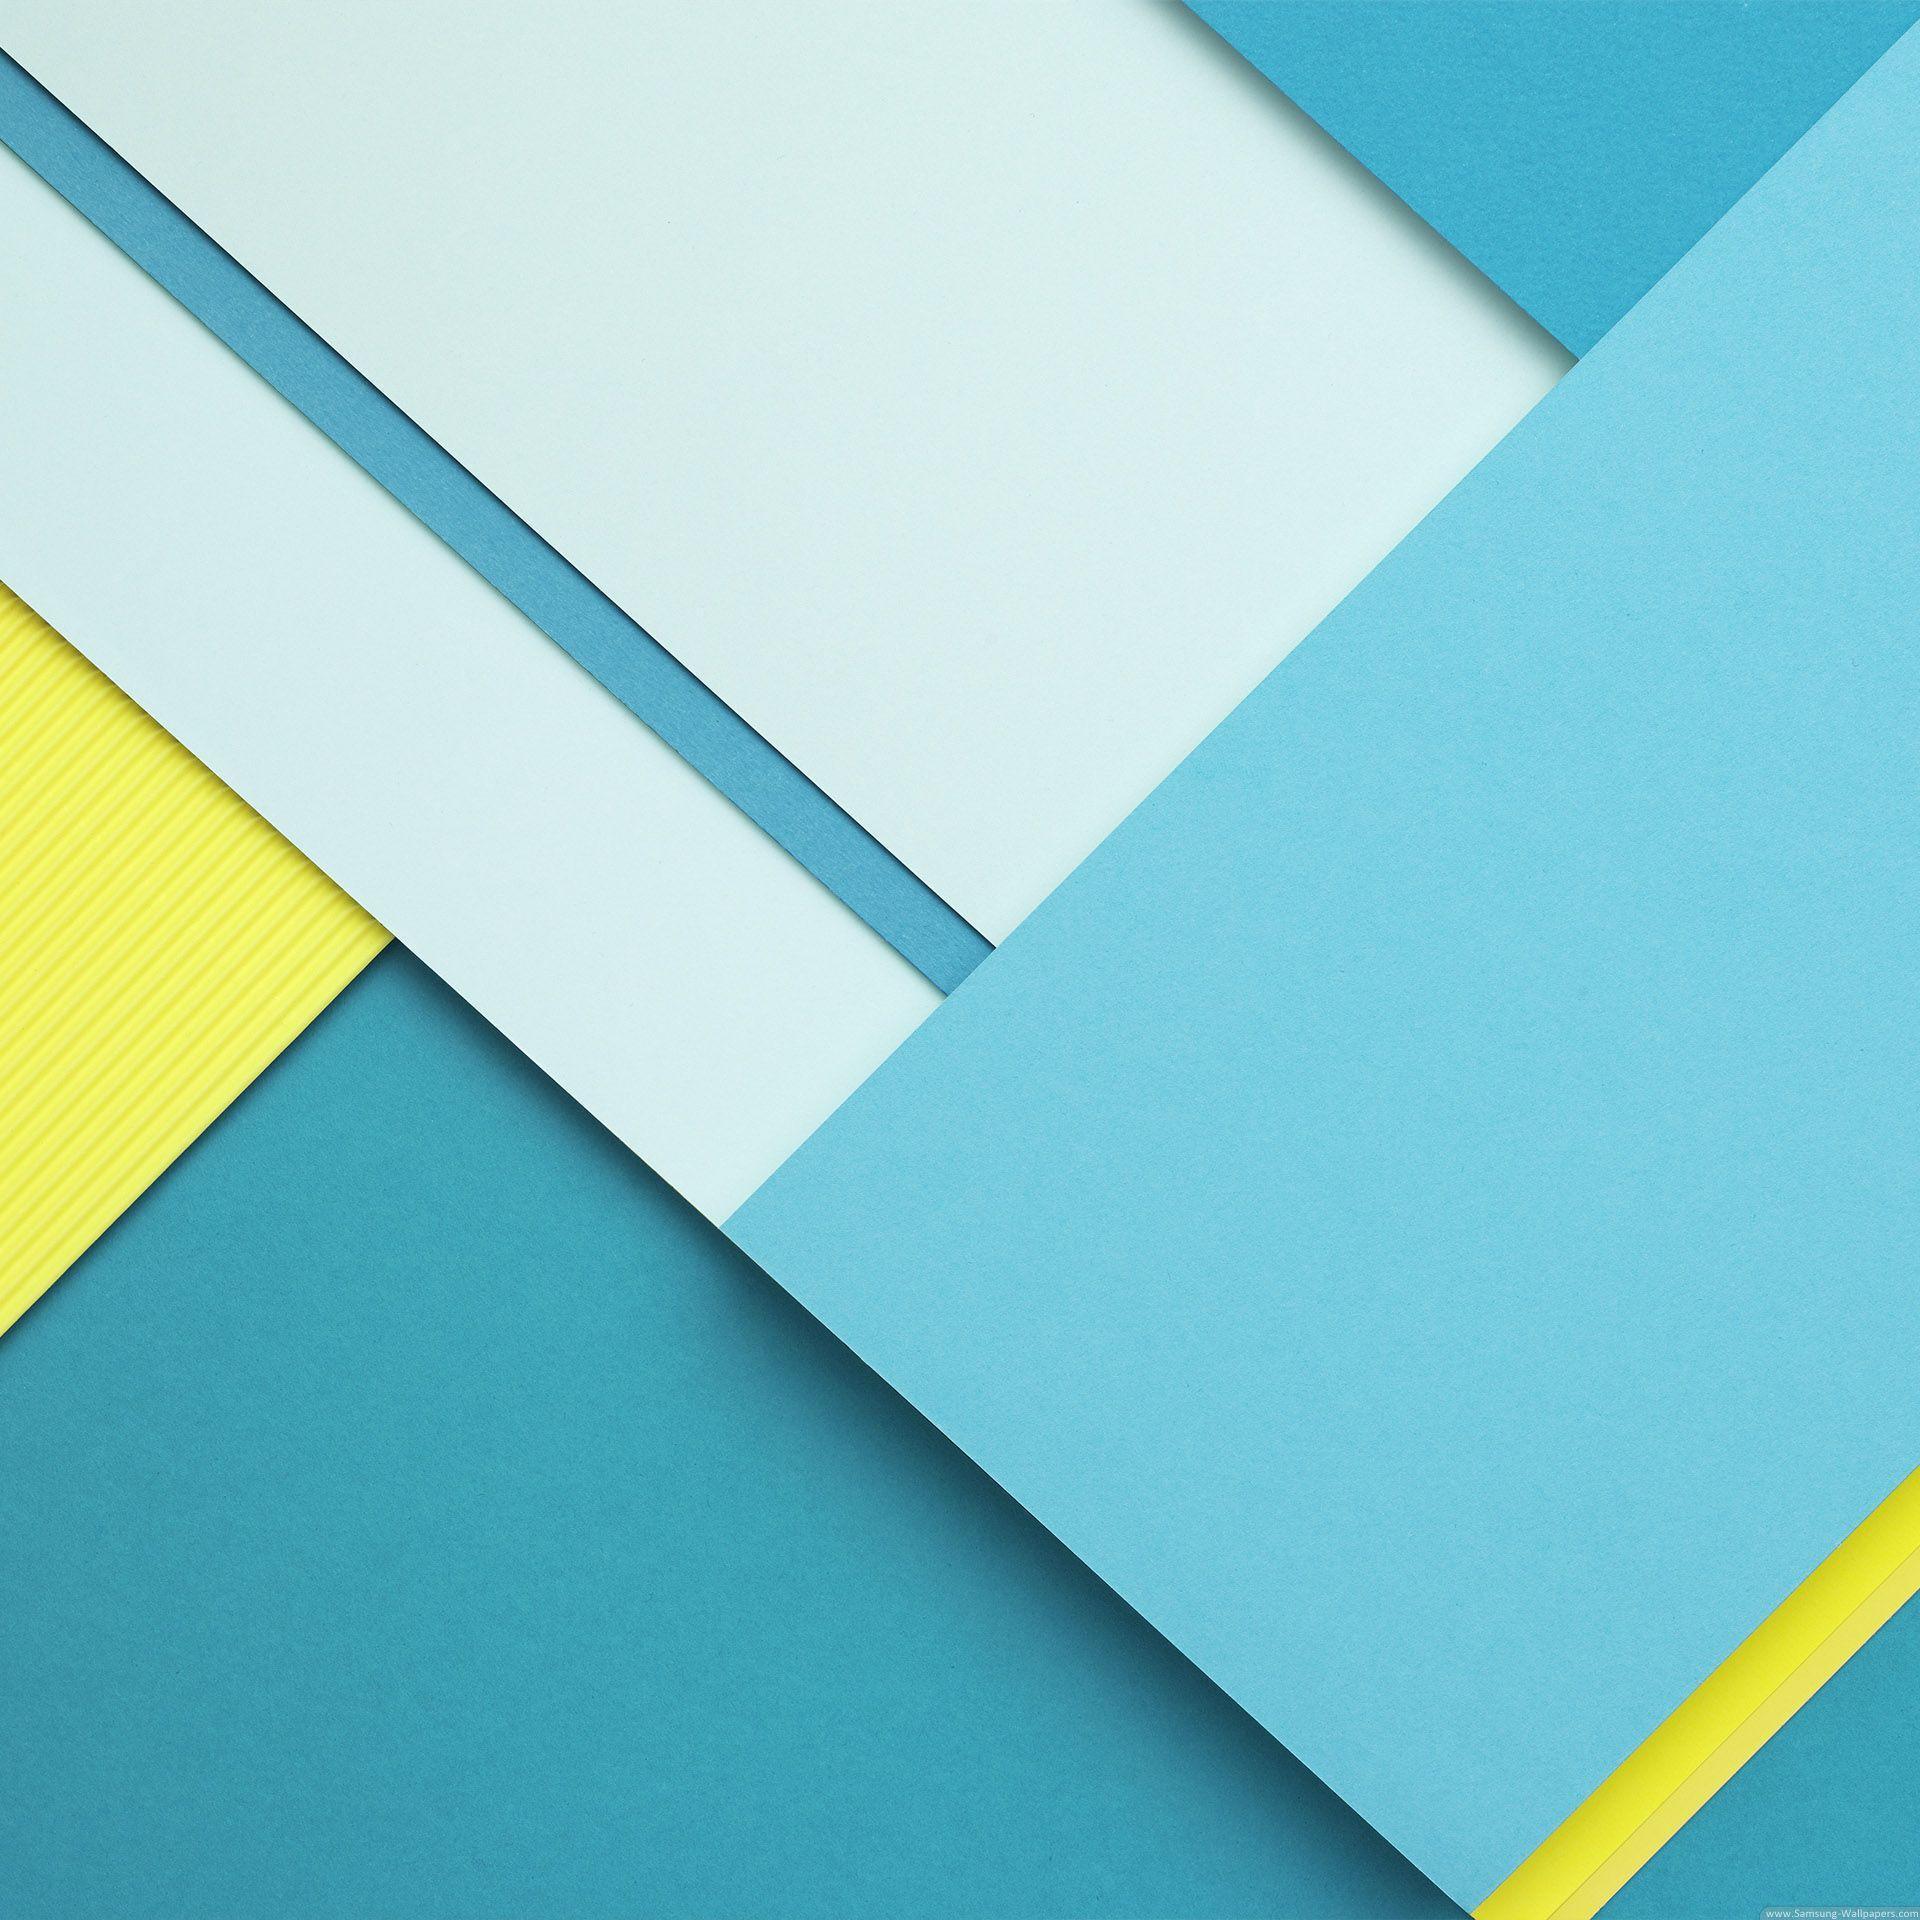 Android 5.0 Lollipop icons & wallpaper